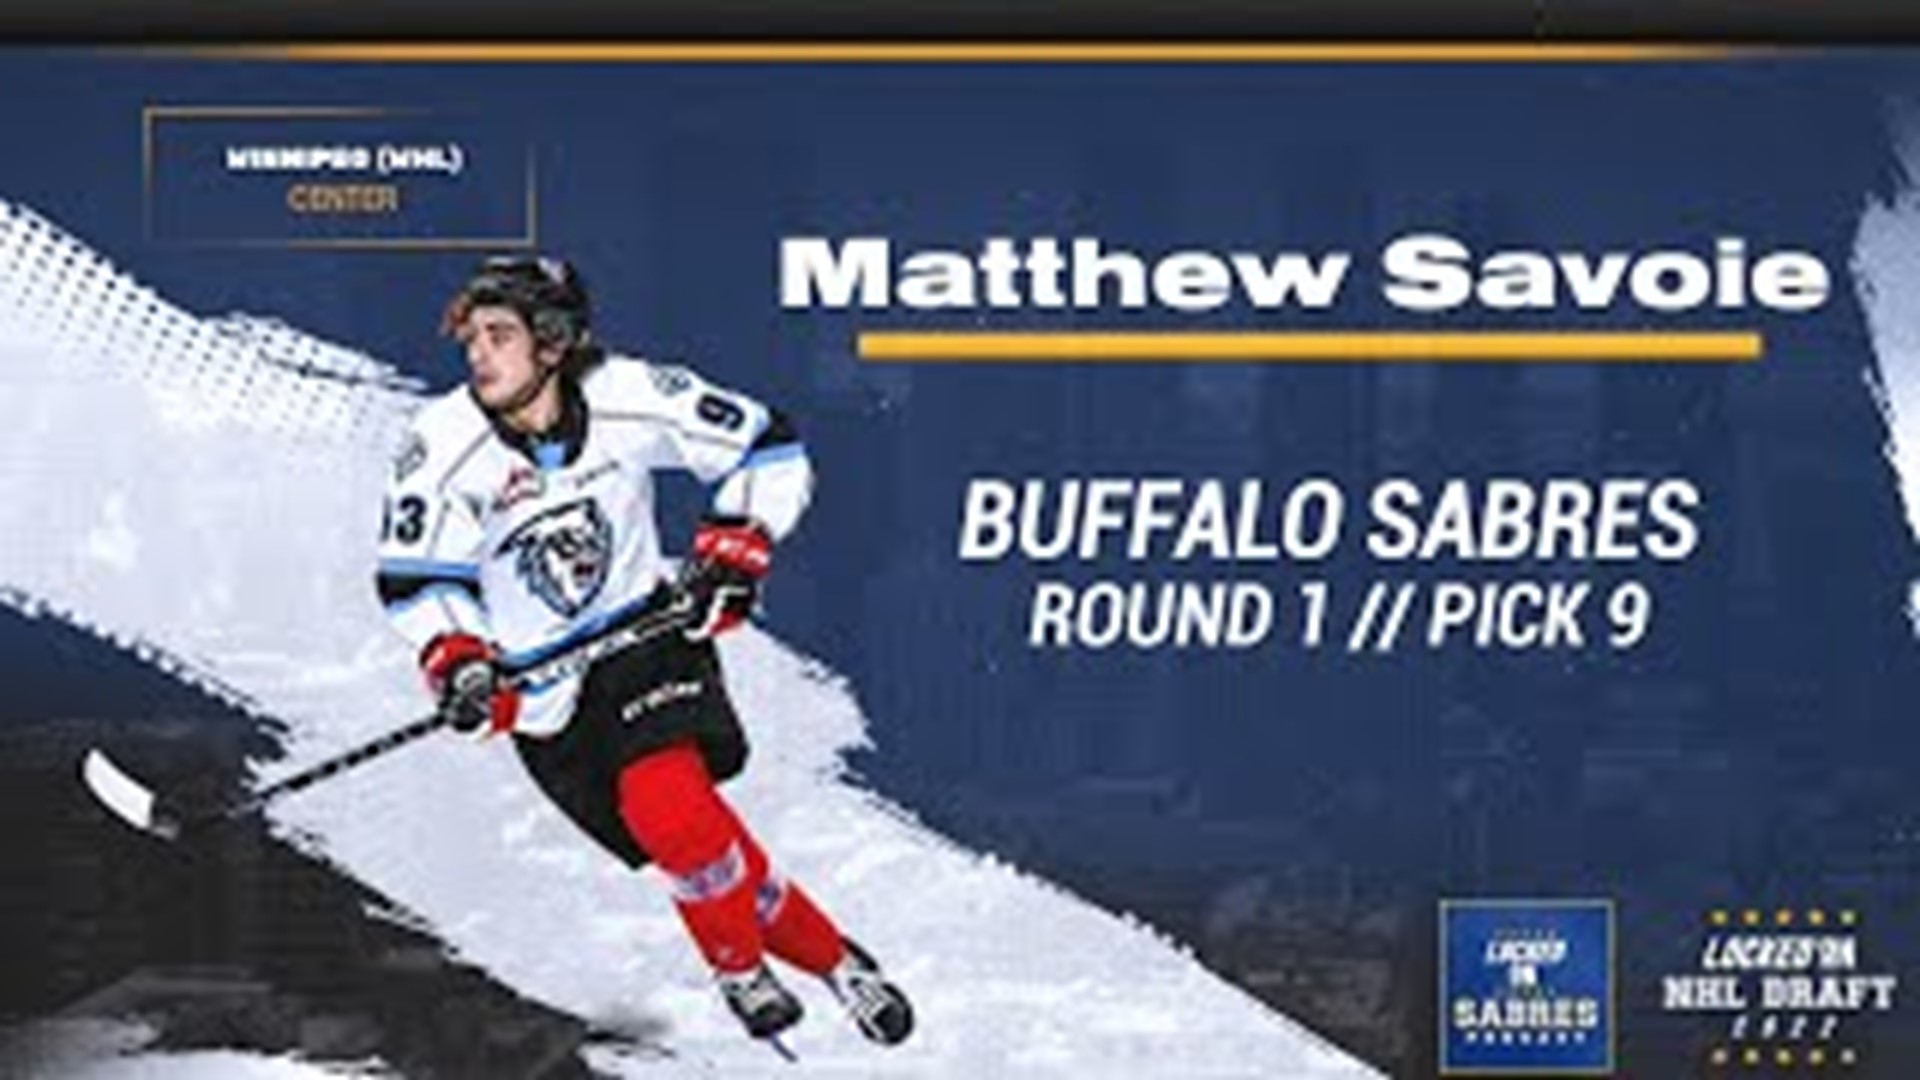 The Buffalo Sabres selected Matthew Savoie with the ninth overall pick in the 2022 NHL Entry Draft on Thursday night in Montreal.